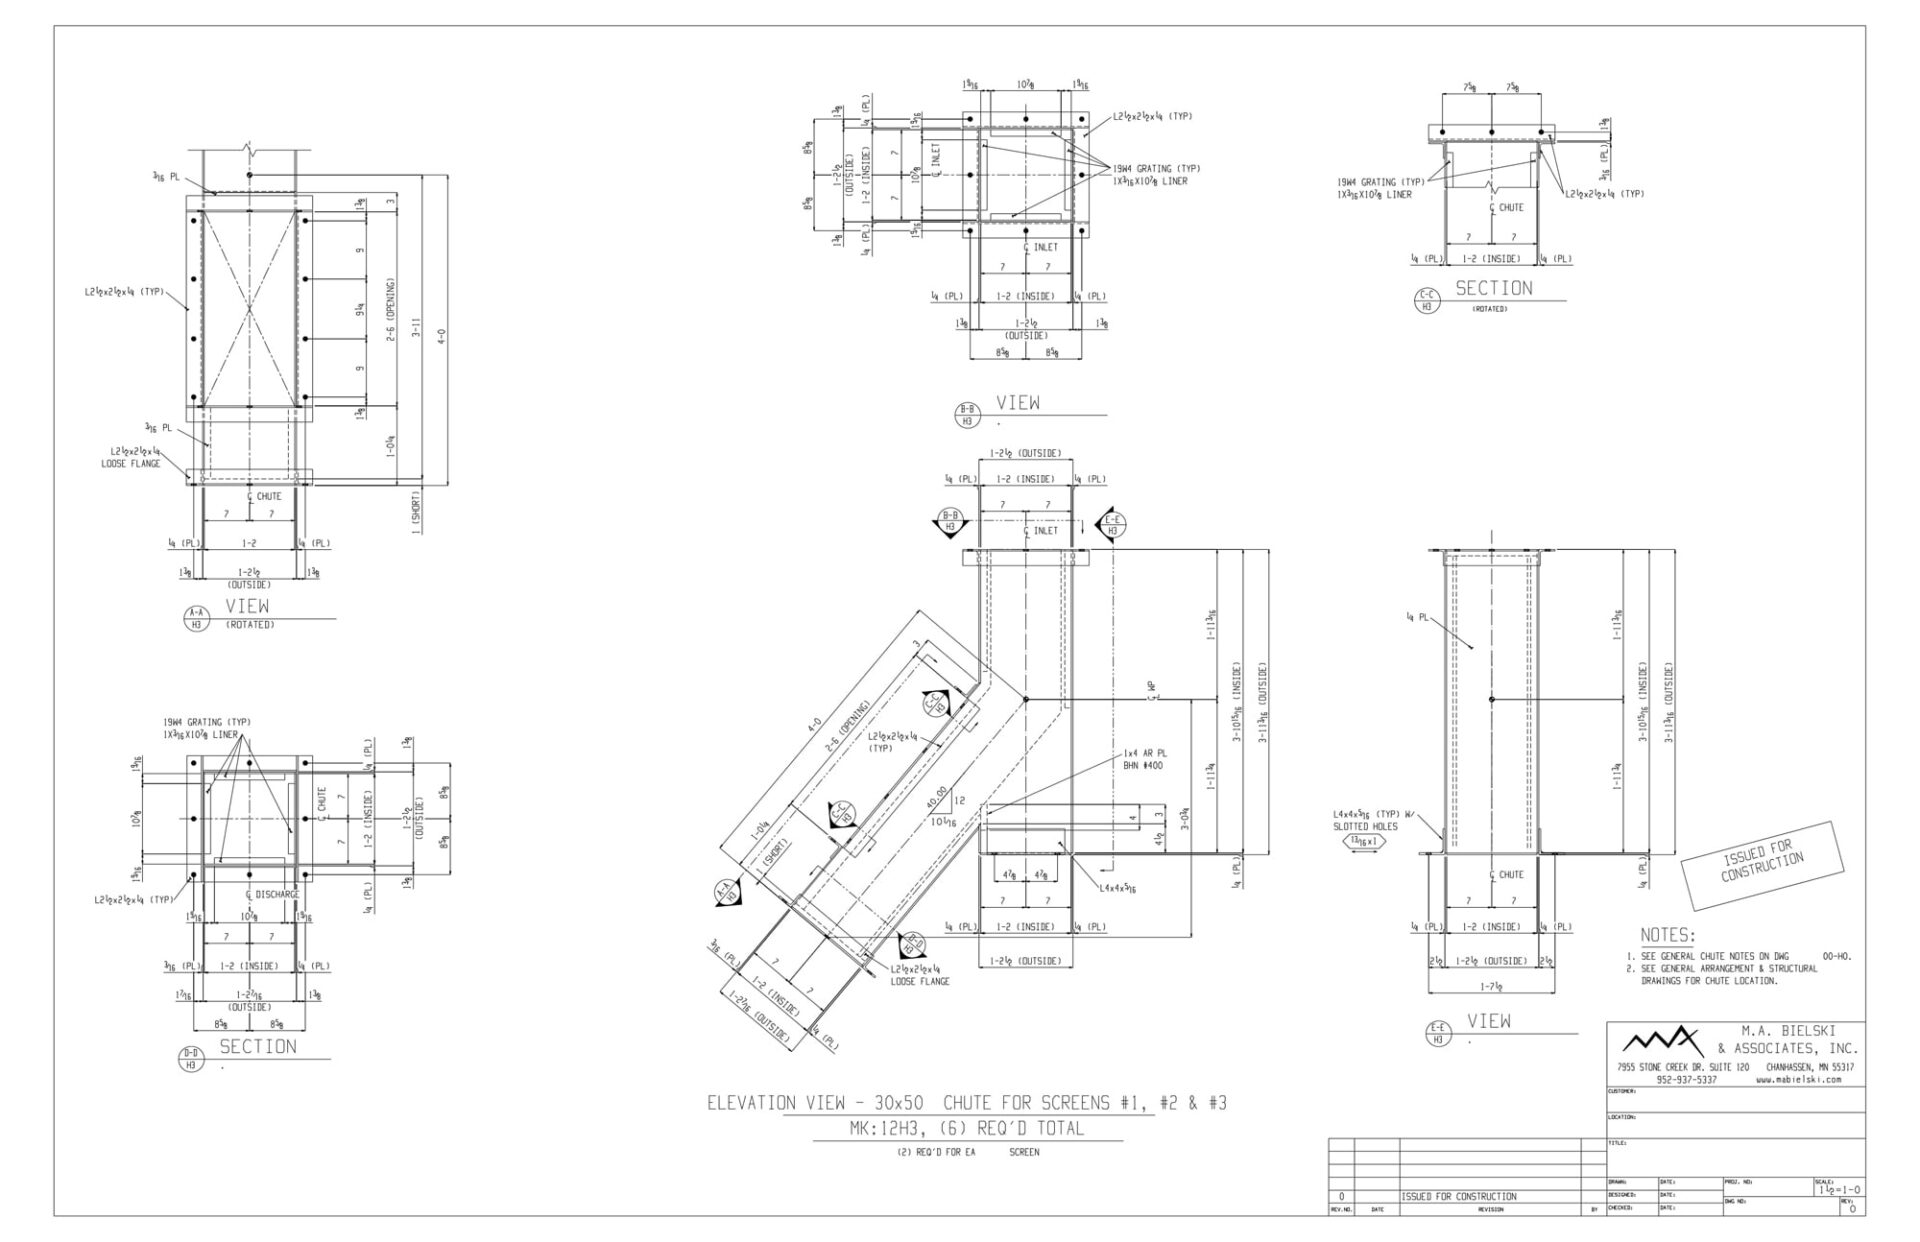 Chute for screens plans